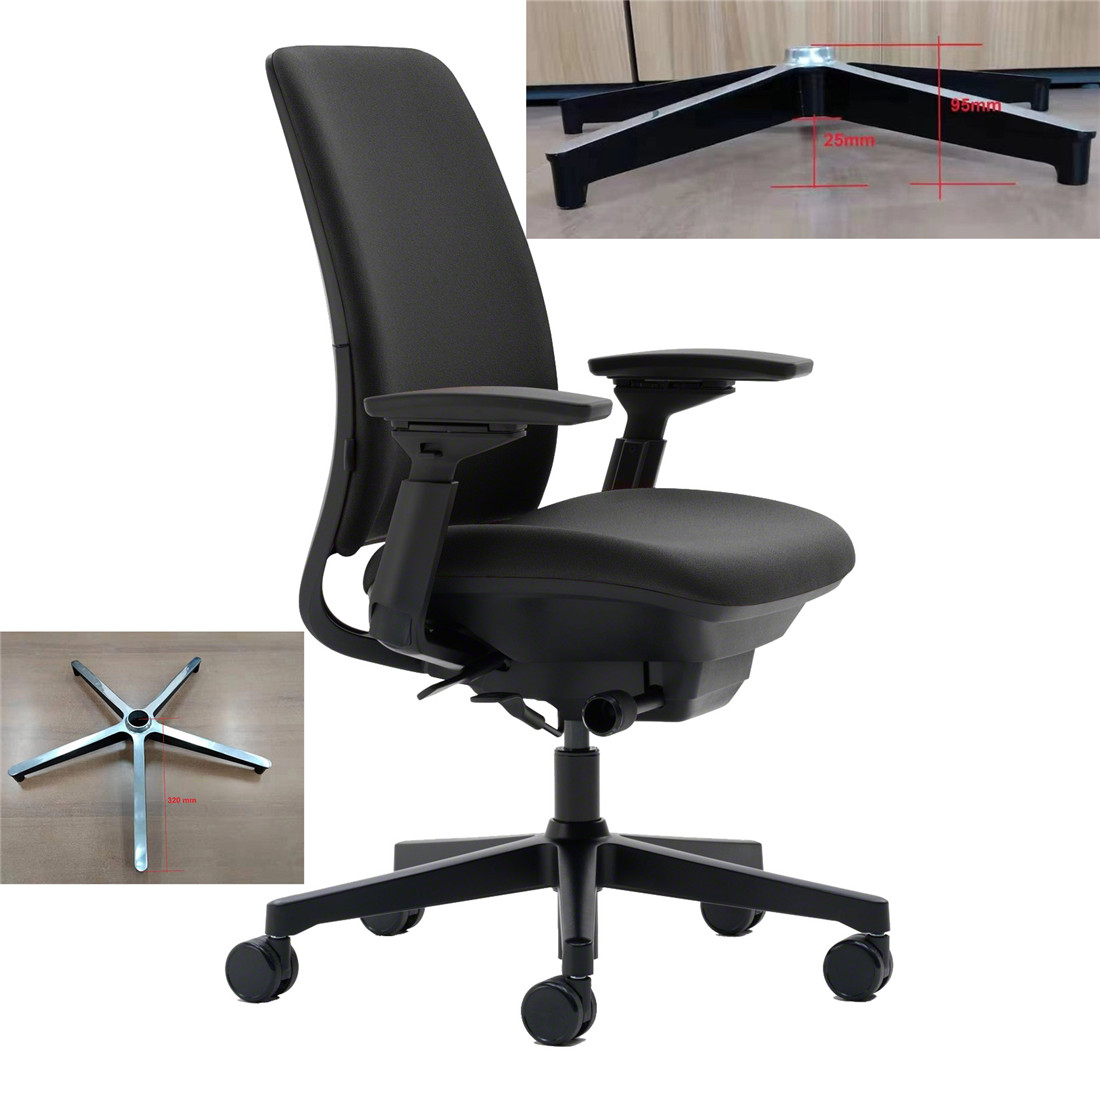 office leap chair v2 with platinum base and frame by steelcase parts manufacturer in China